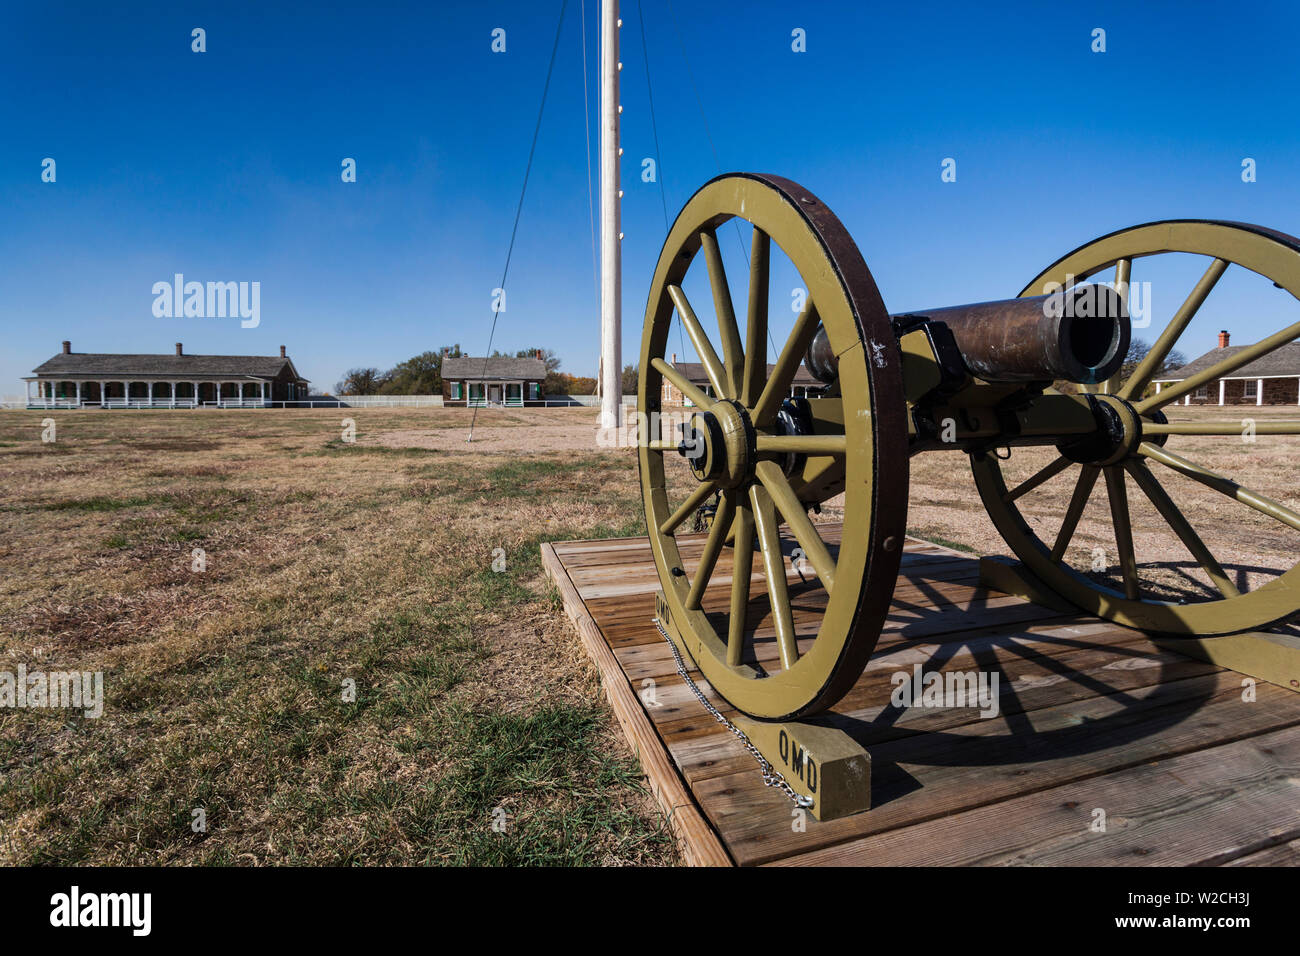 USA, Kansas, Larned, Fort Larned National Historic Site, mid-19th century military outpost, protecting the Santa Fe Trail, artillery Stock Photo